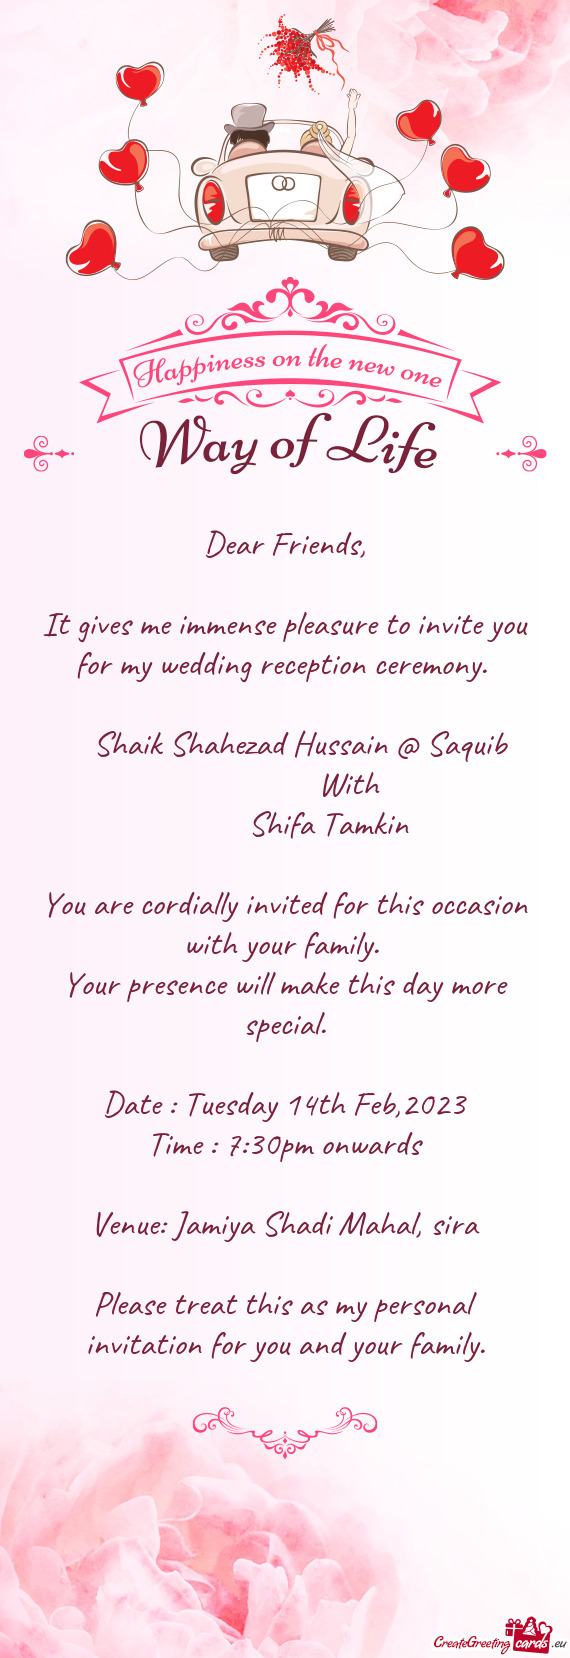 It gives me immense pleasure to invite you for my wedding reception ceremony